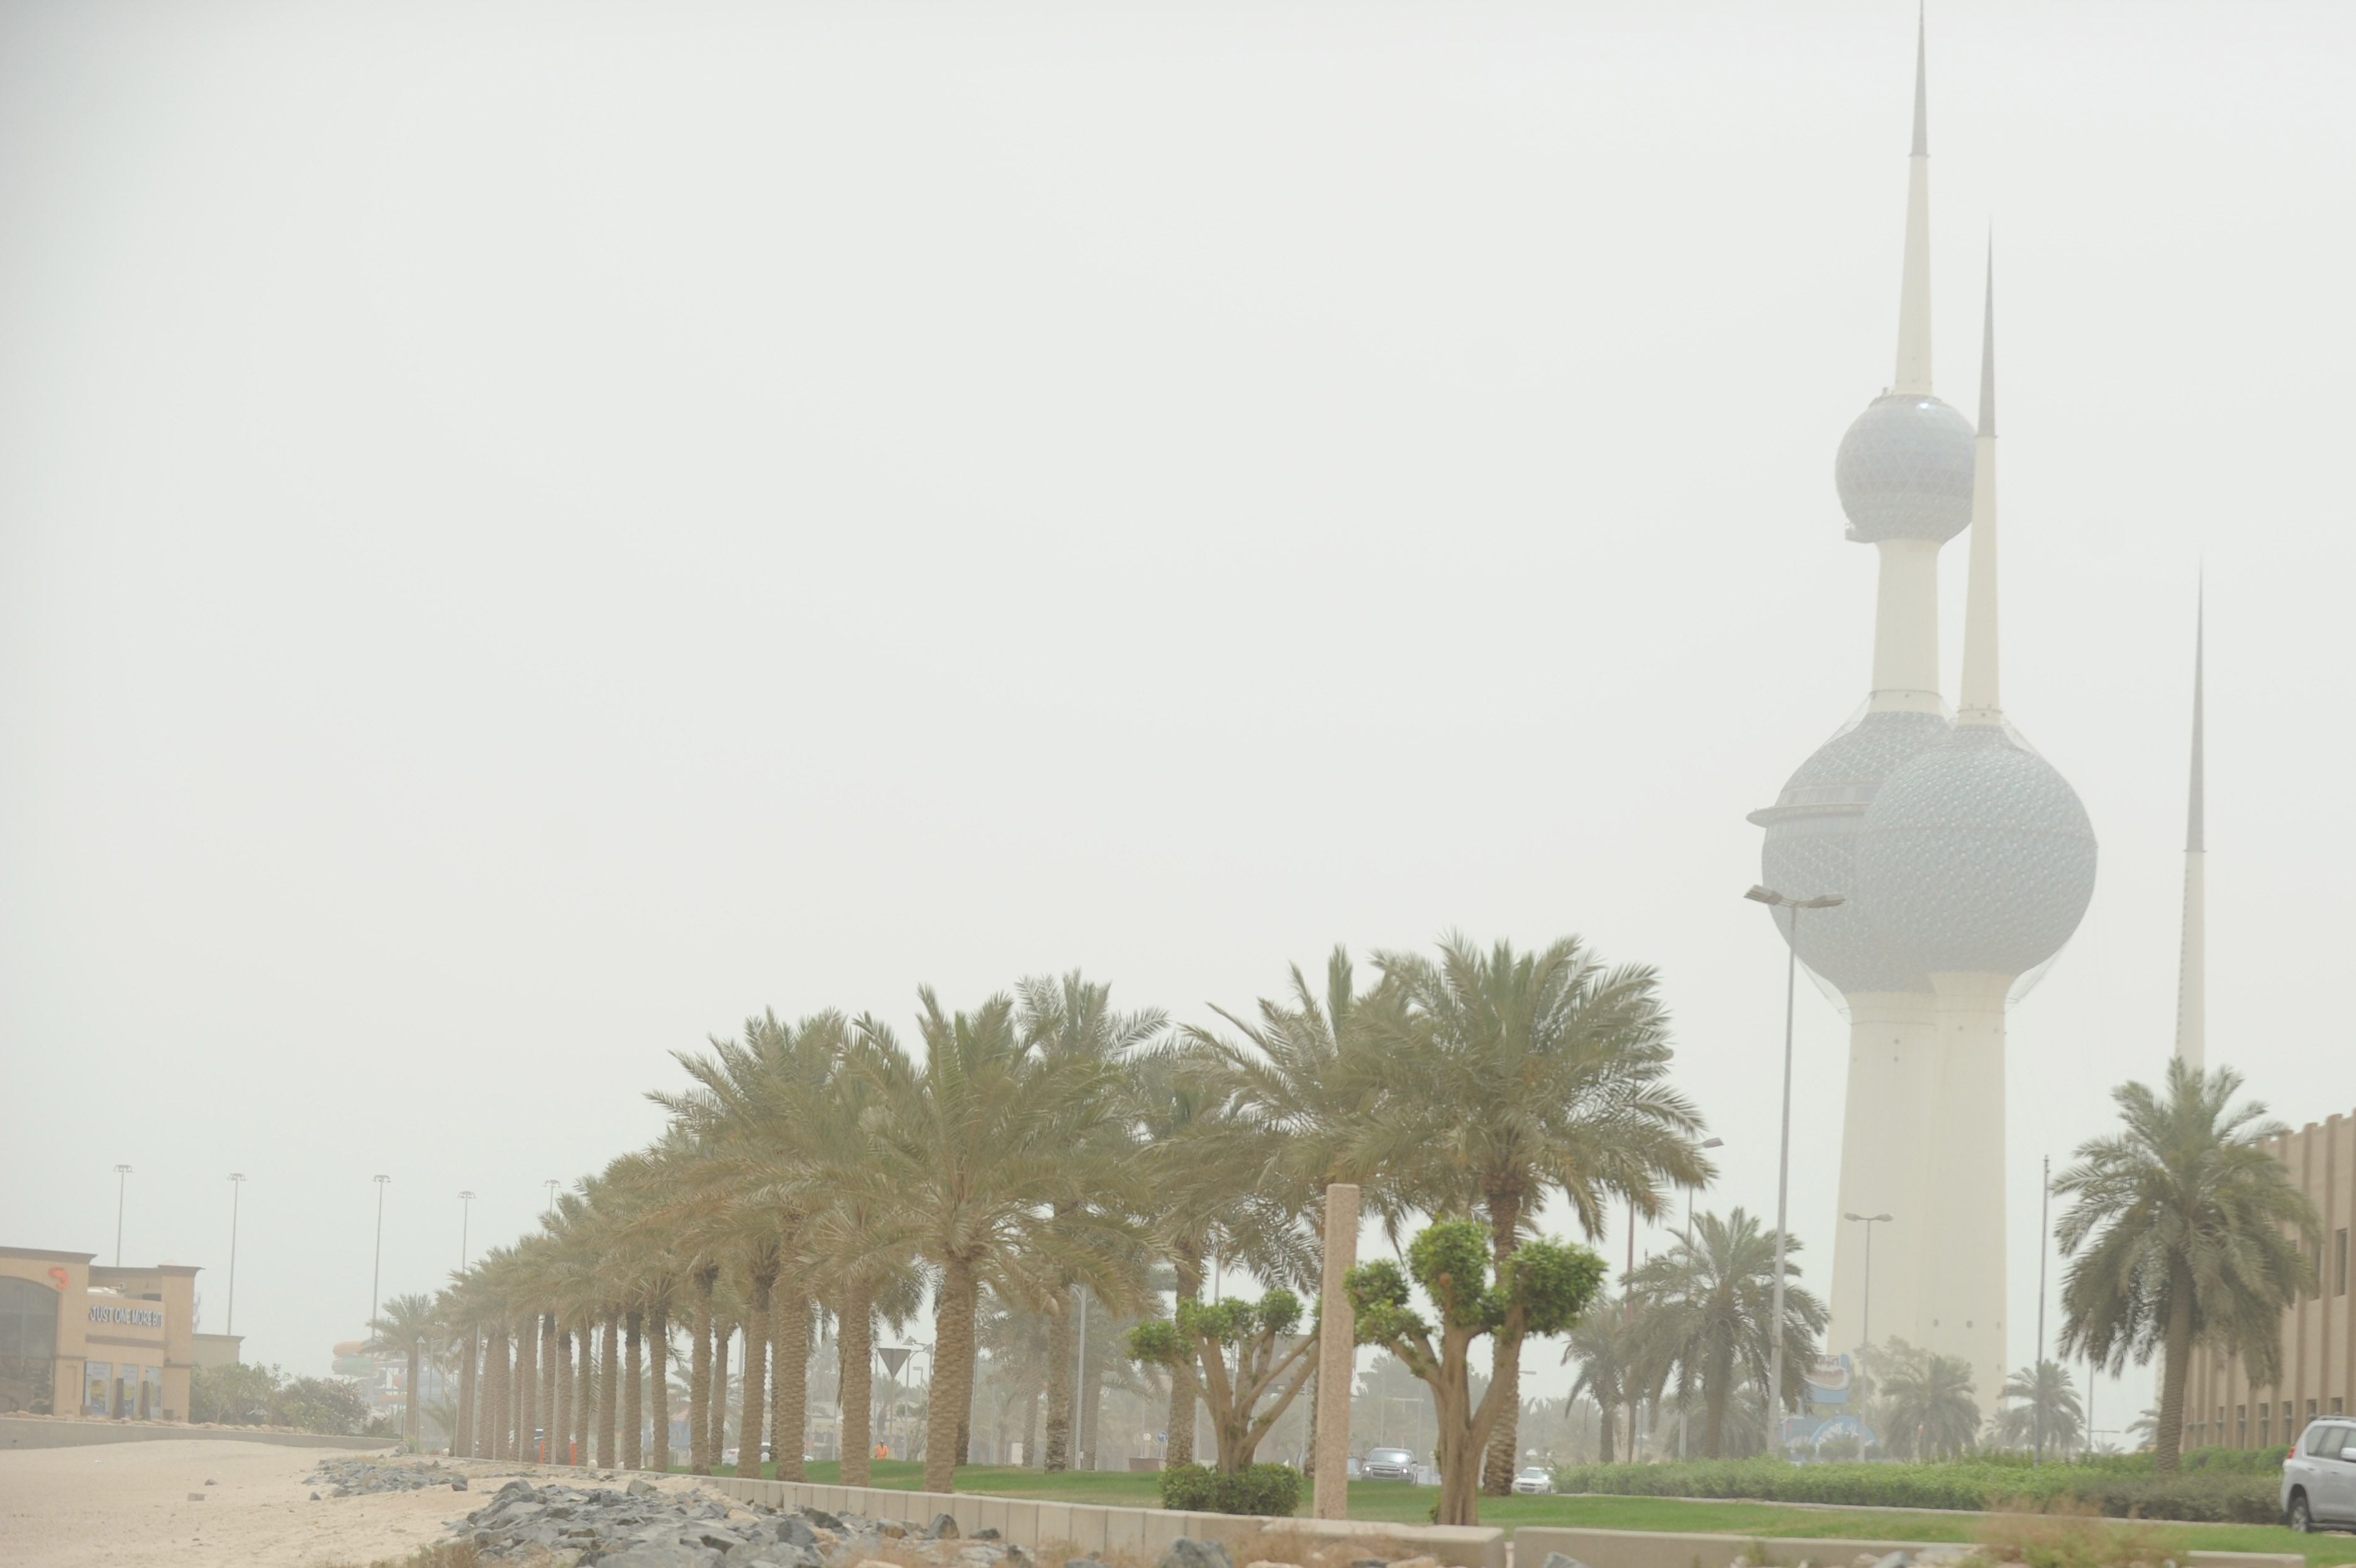 Seasonal Sudanese low pressure, coupled with incoming hot and humid heath waves, are currently causing unfavorable weather conditions in Kuwait